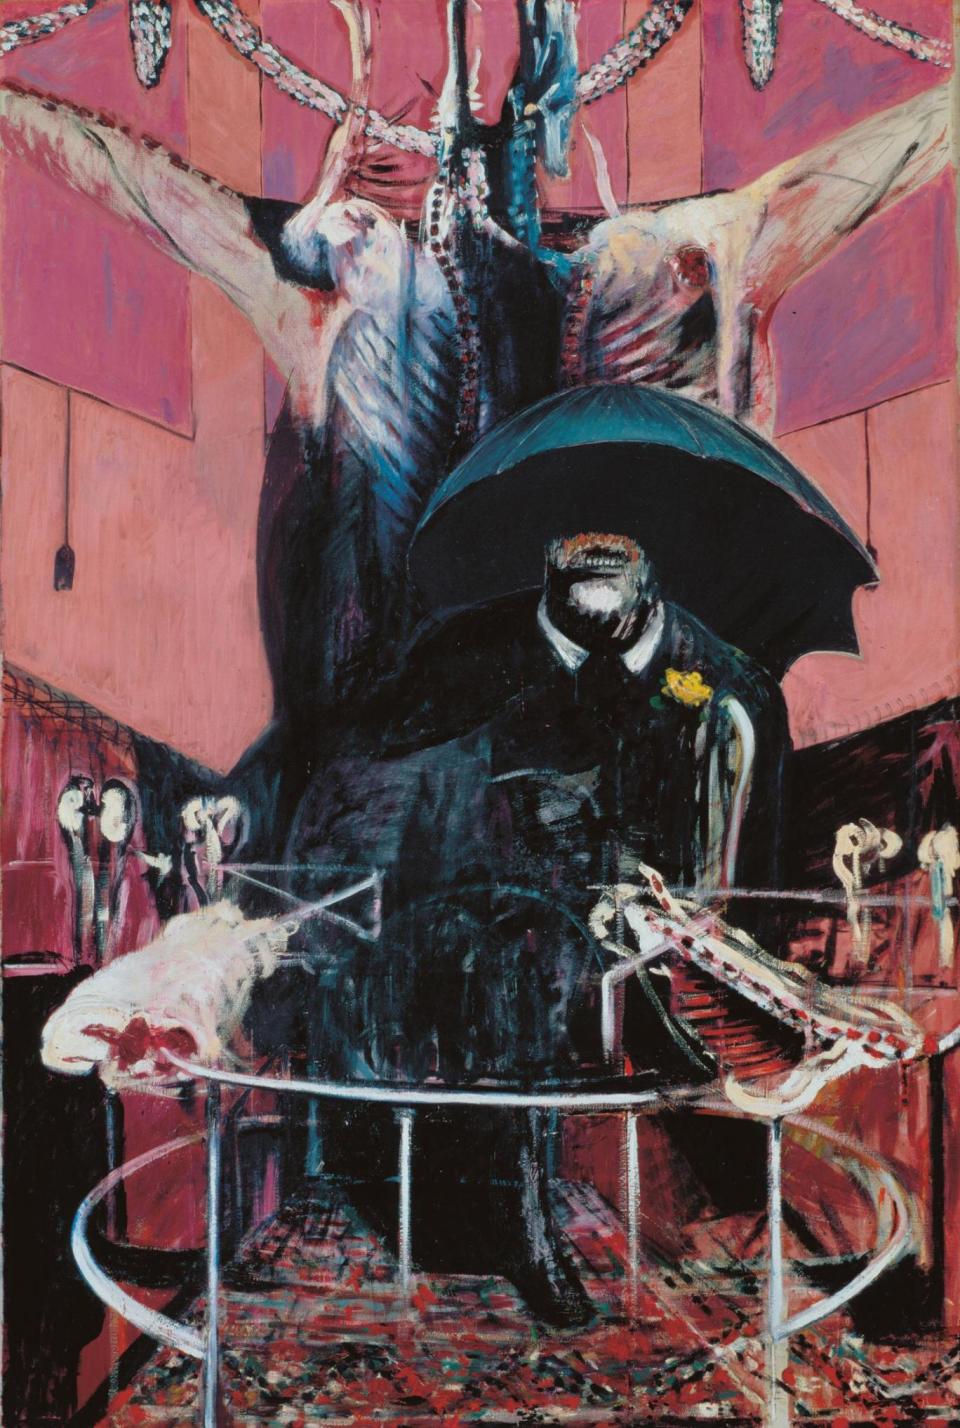 Power and gory: Painting by Francis Bacon, 1946, One of the greatest pictures of his career and the first he considered complete